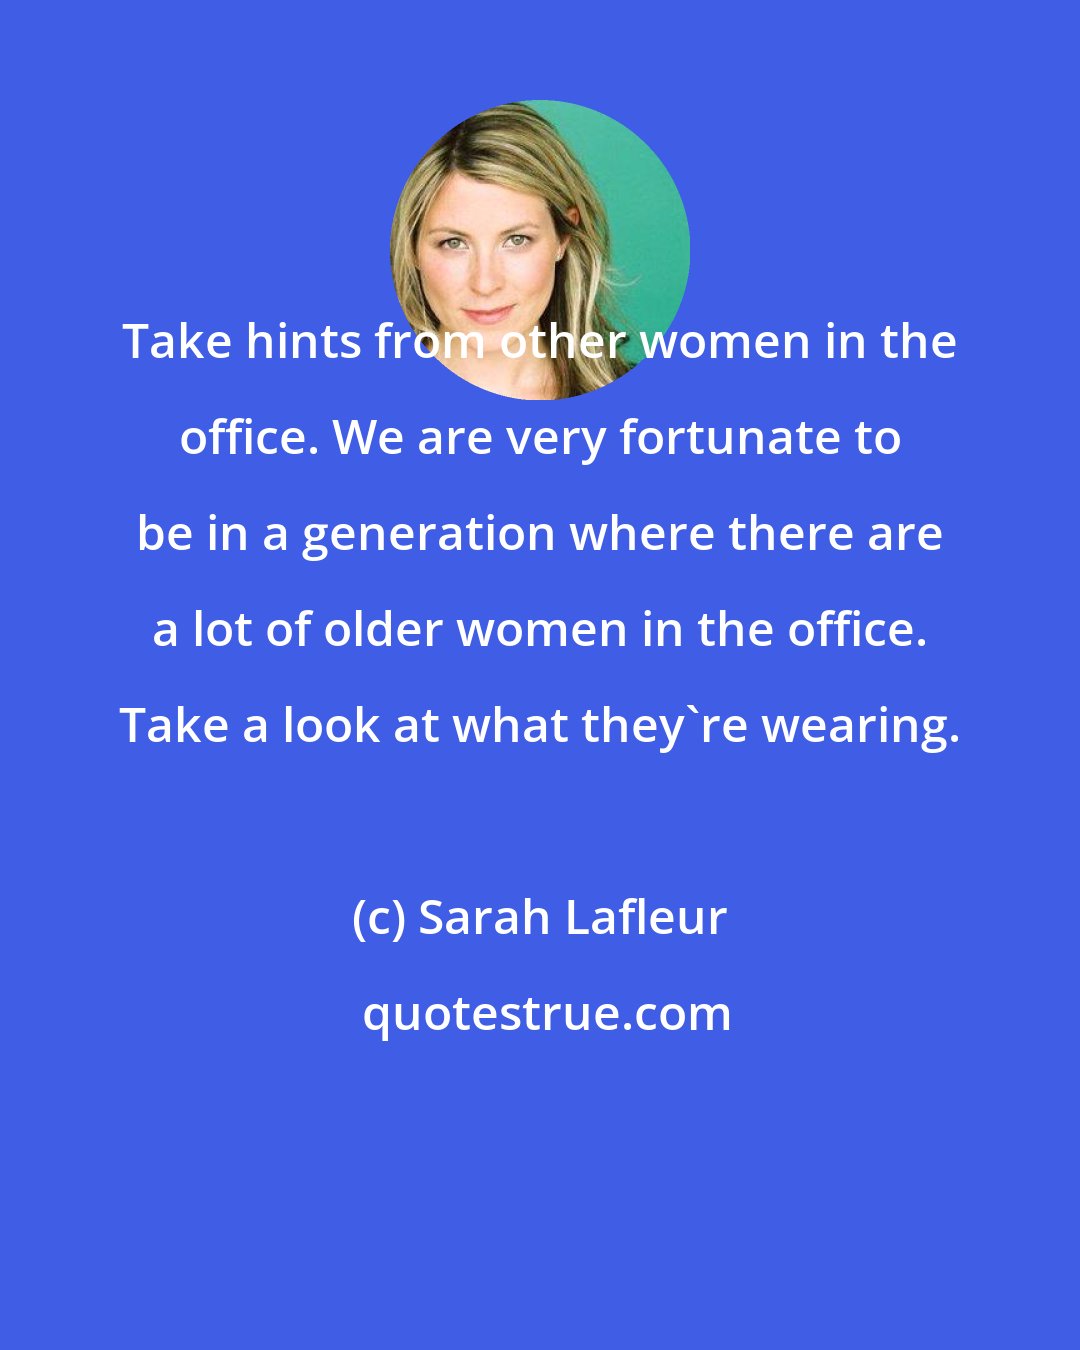 Sarah Lafleur: Take hints from other women in the office. We are very fortunate to be in a generation where there are a lot of older women in the office. Take a look at what they're wearing.